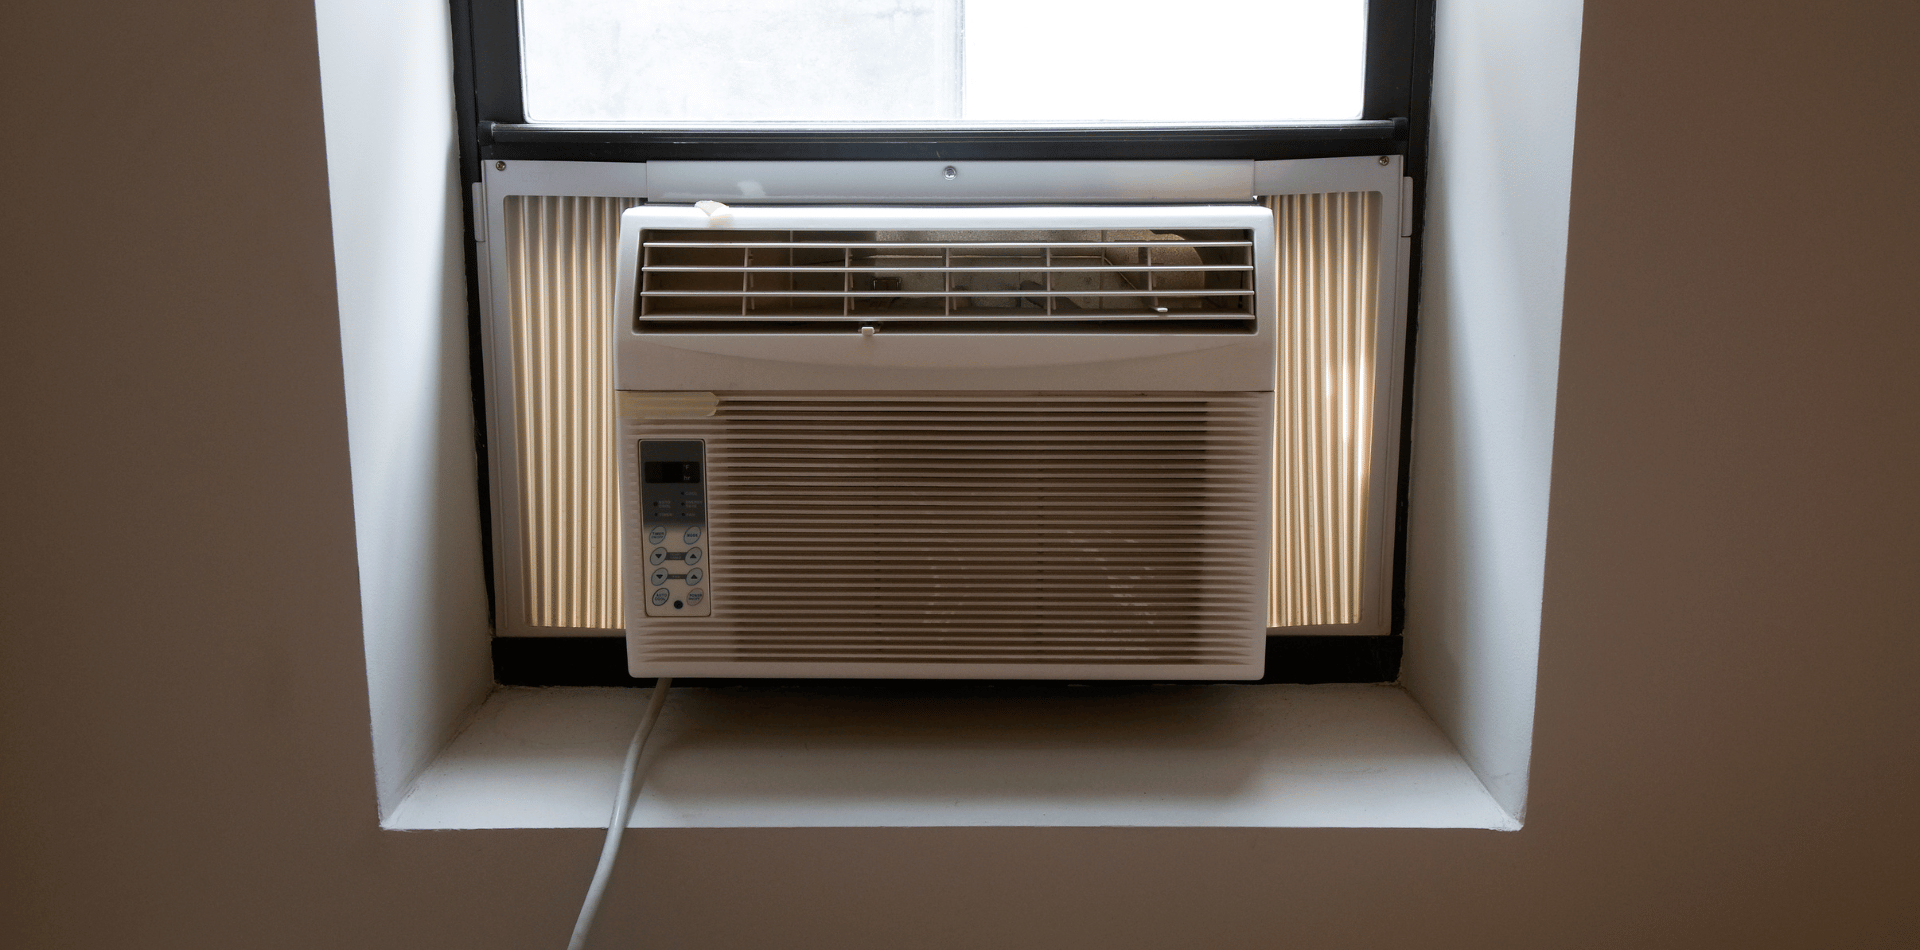 An inside view of a window air conditioner